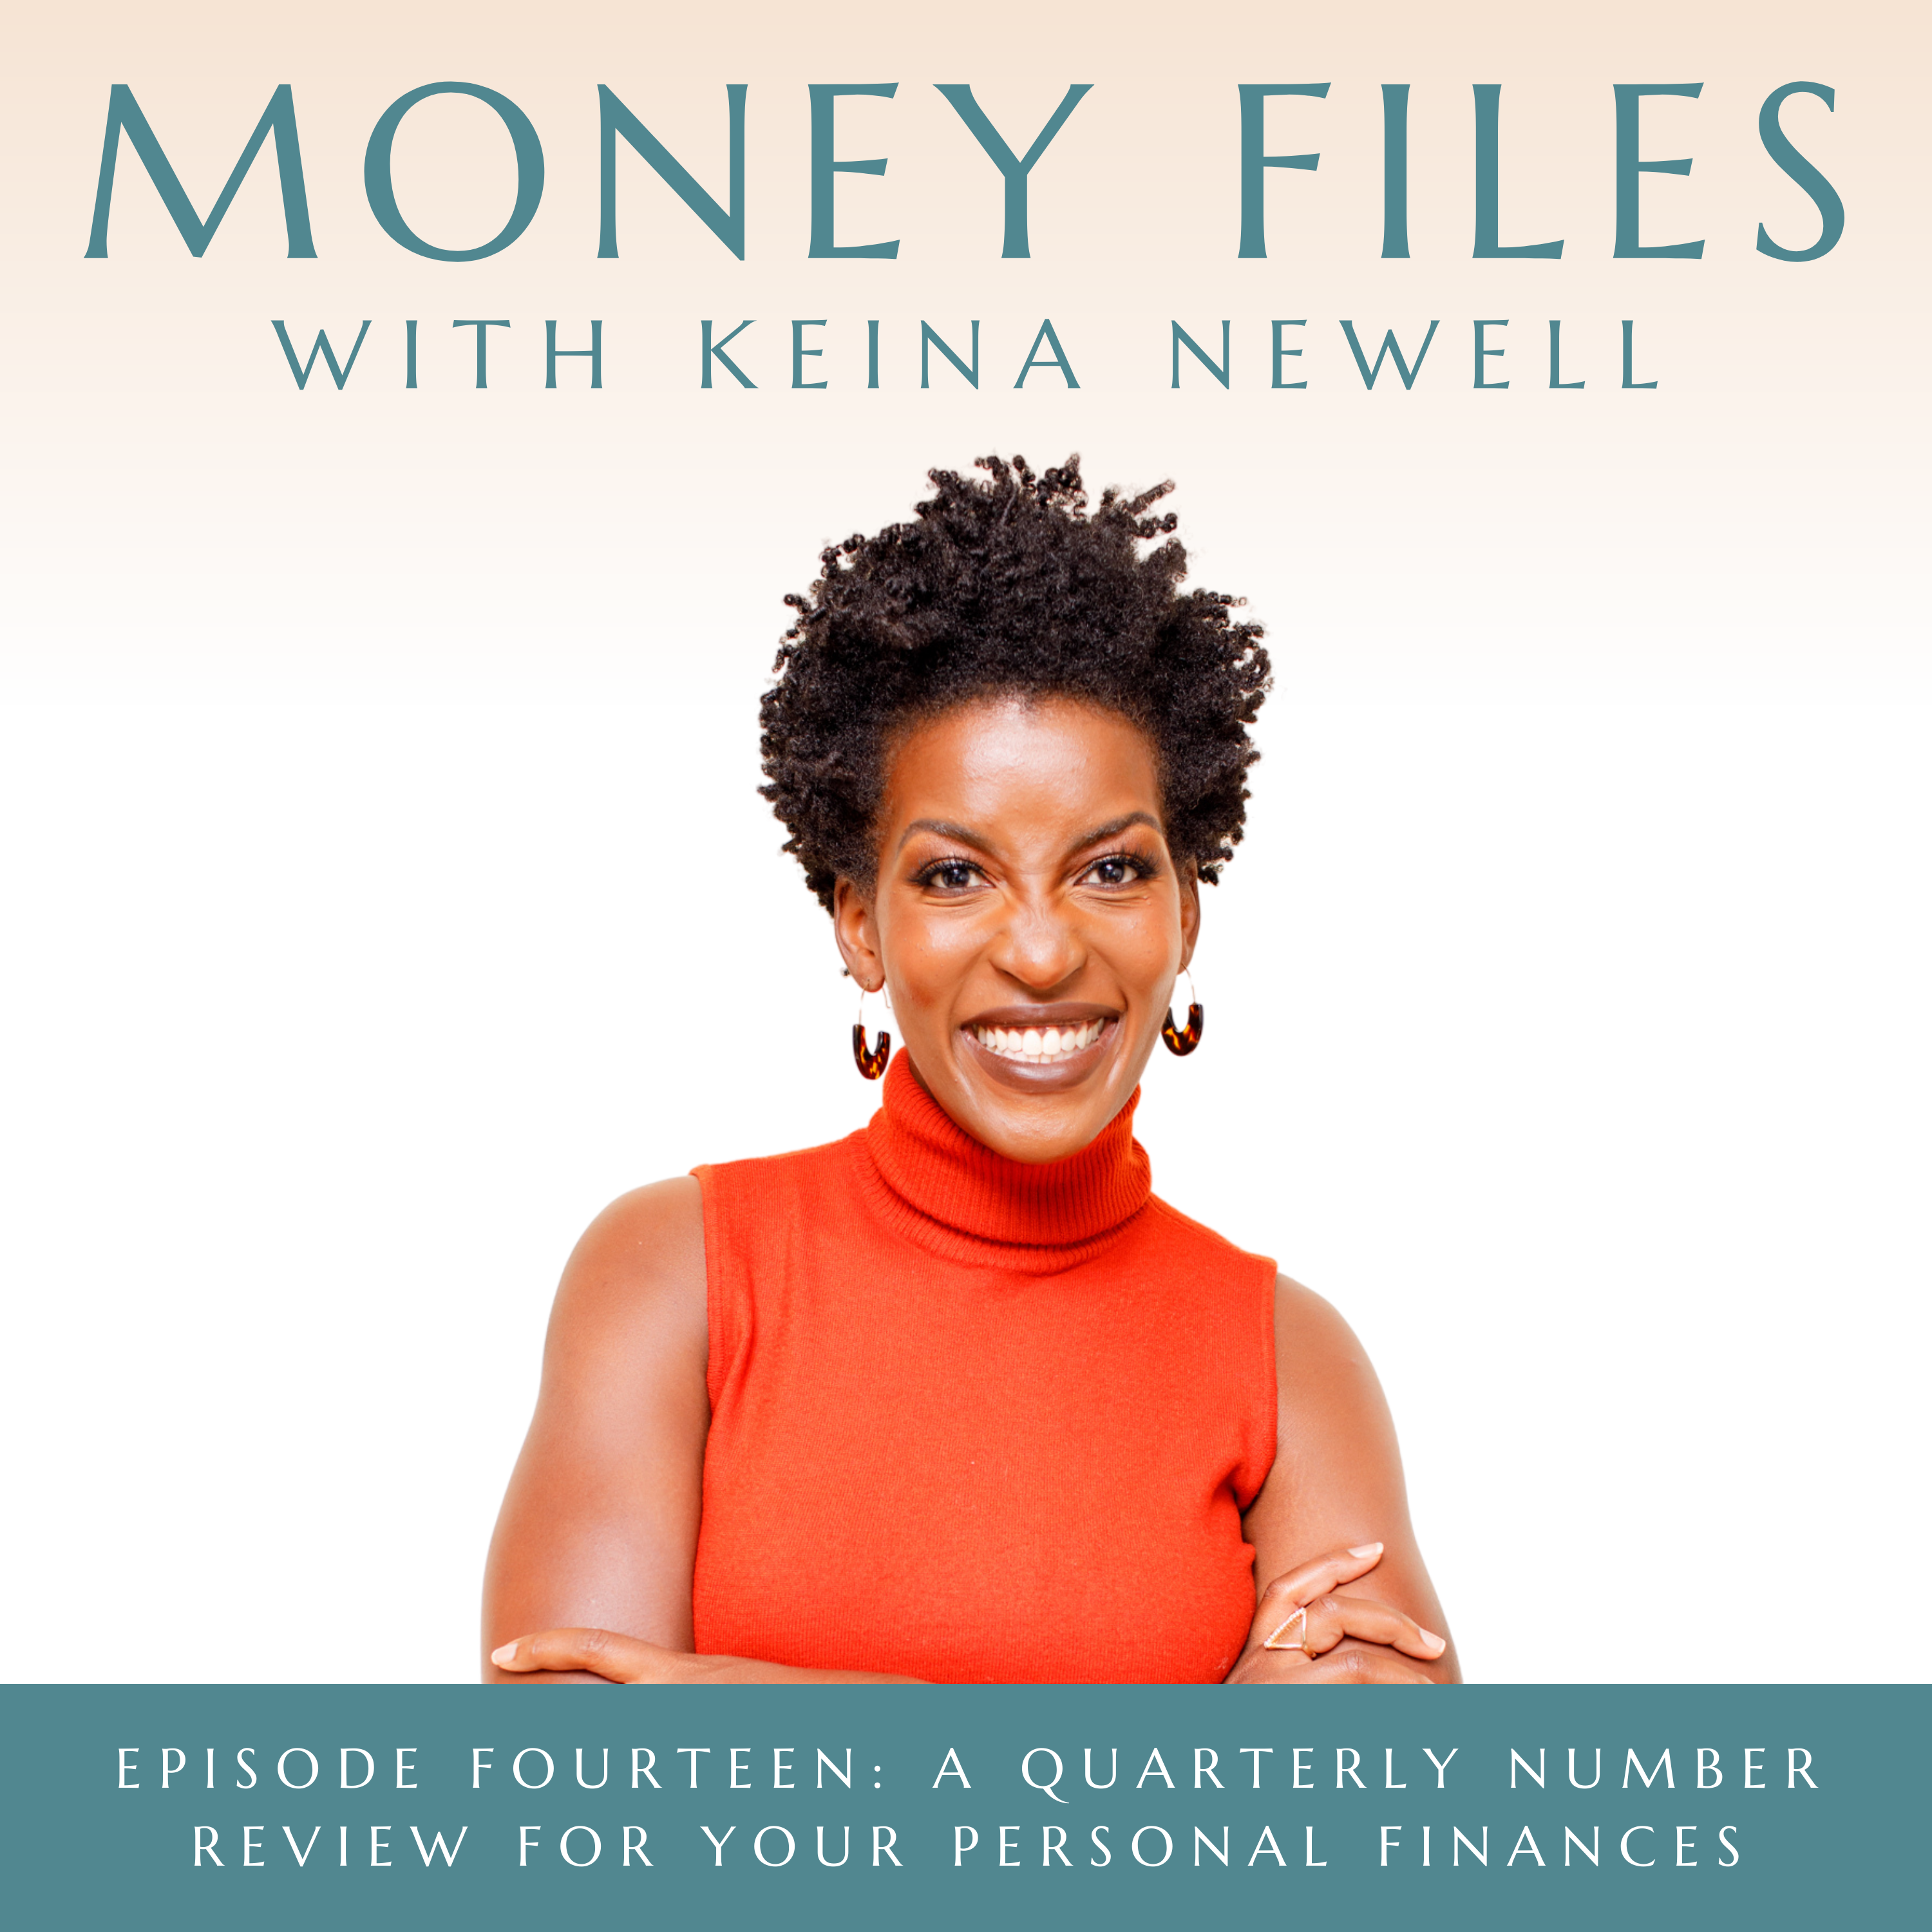 A Quarterly Number Review For Your Personal Finances